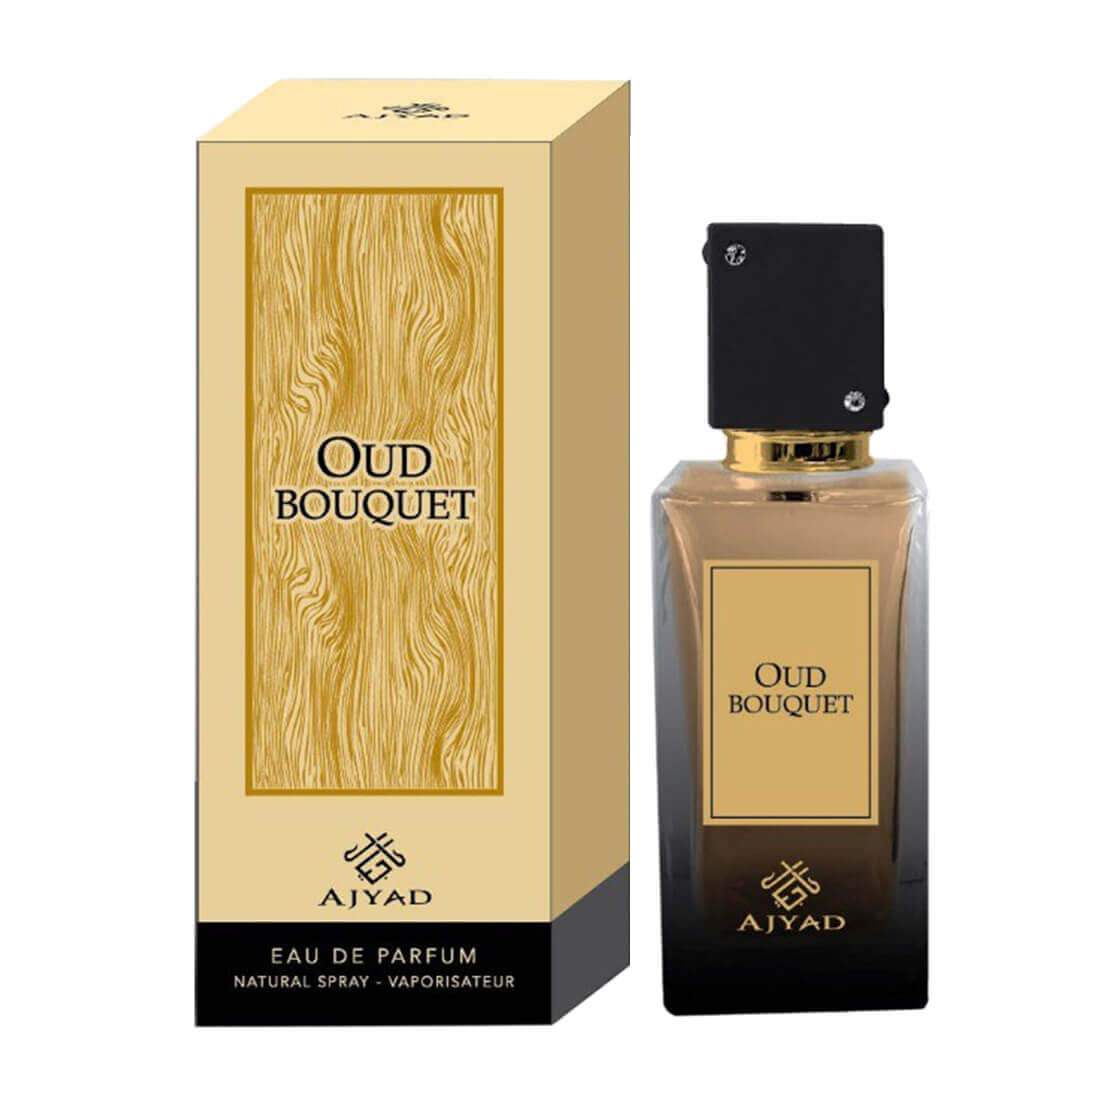 Buy Top Selling Ajyad Oud Bouquet Spray At Best Price Fridaycharm Fridaycharm Com